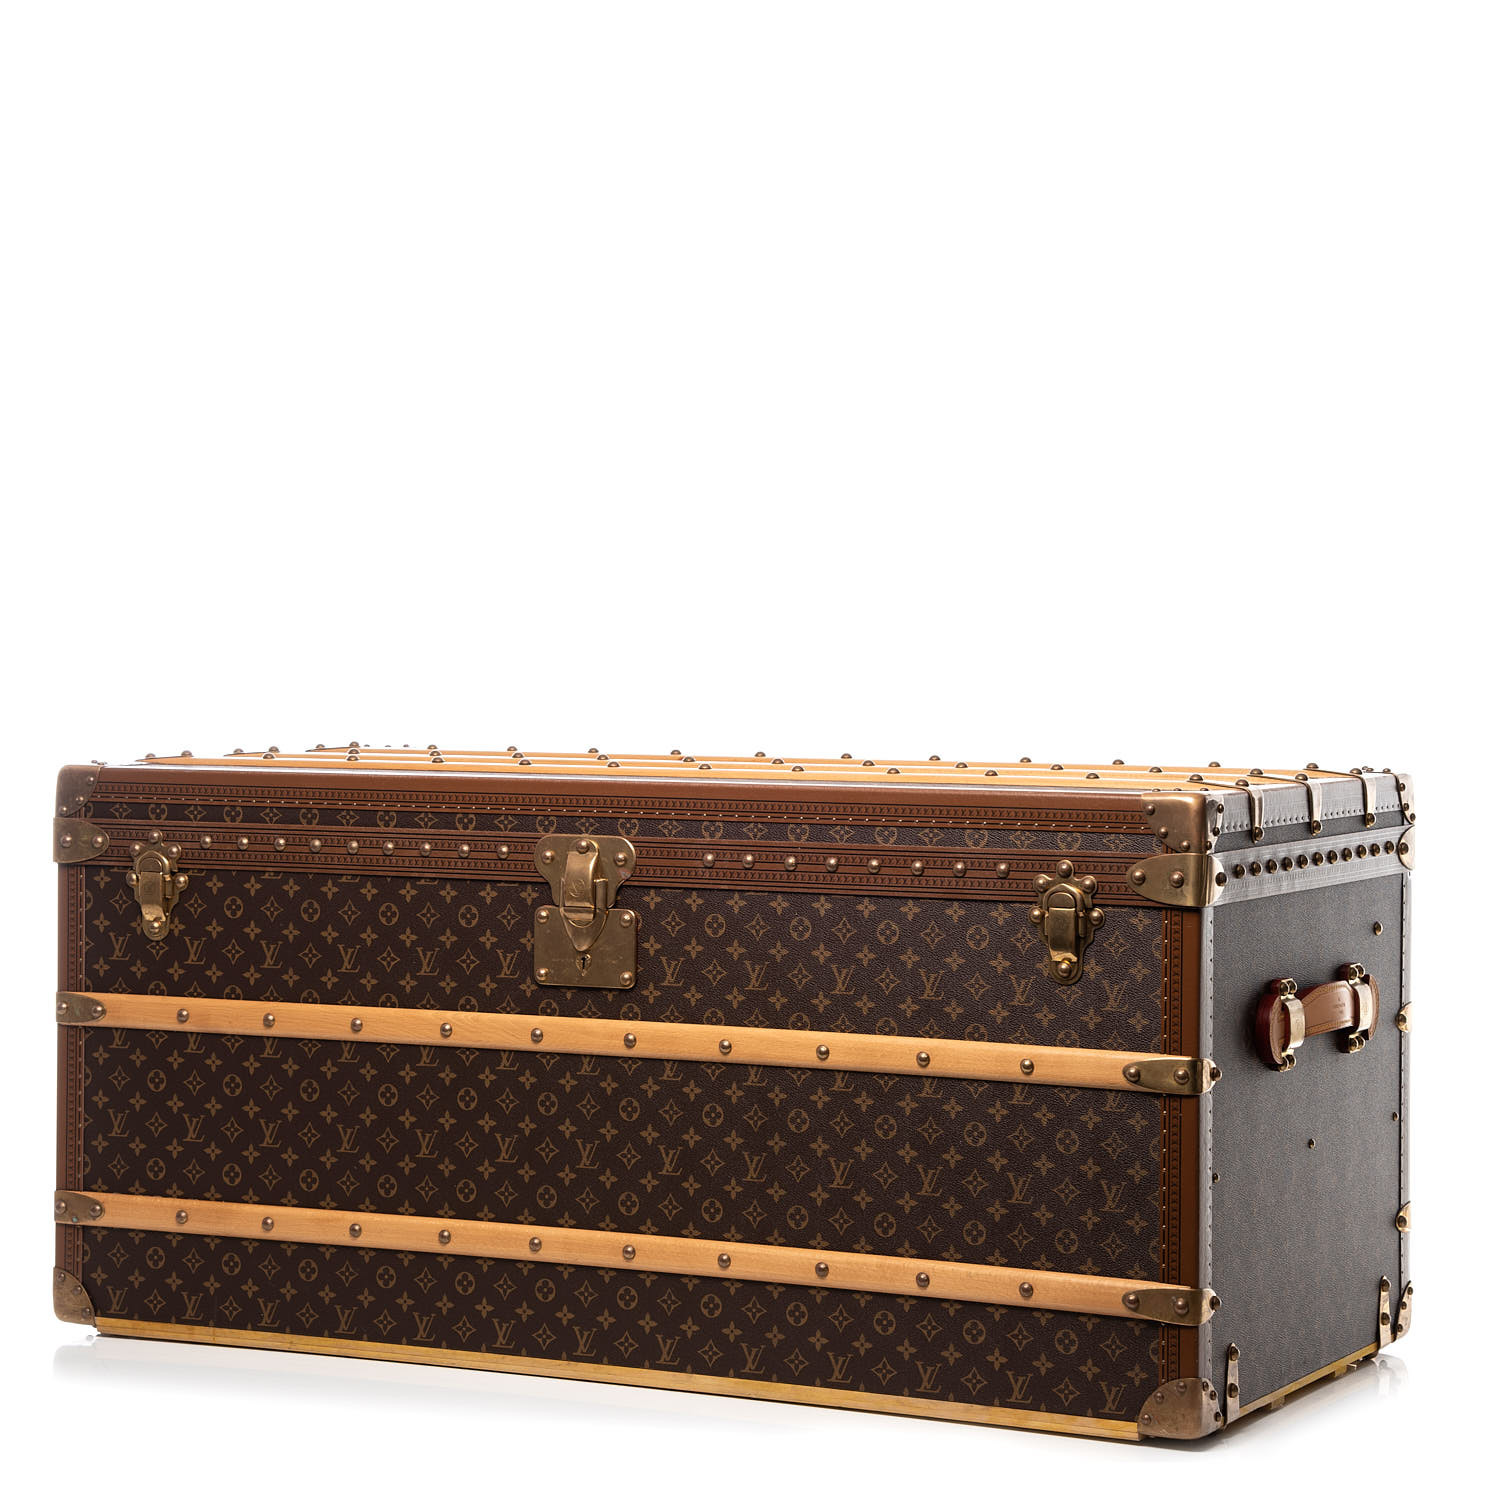 Monogram Coated Canvas Malle Courrier 90 Trunk